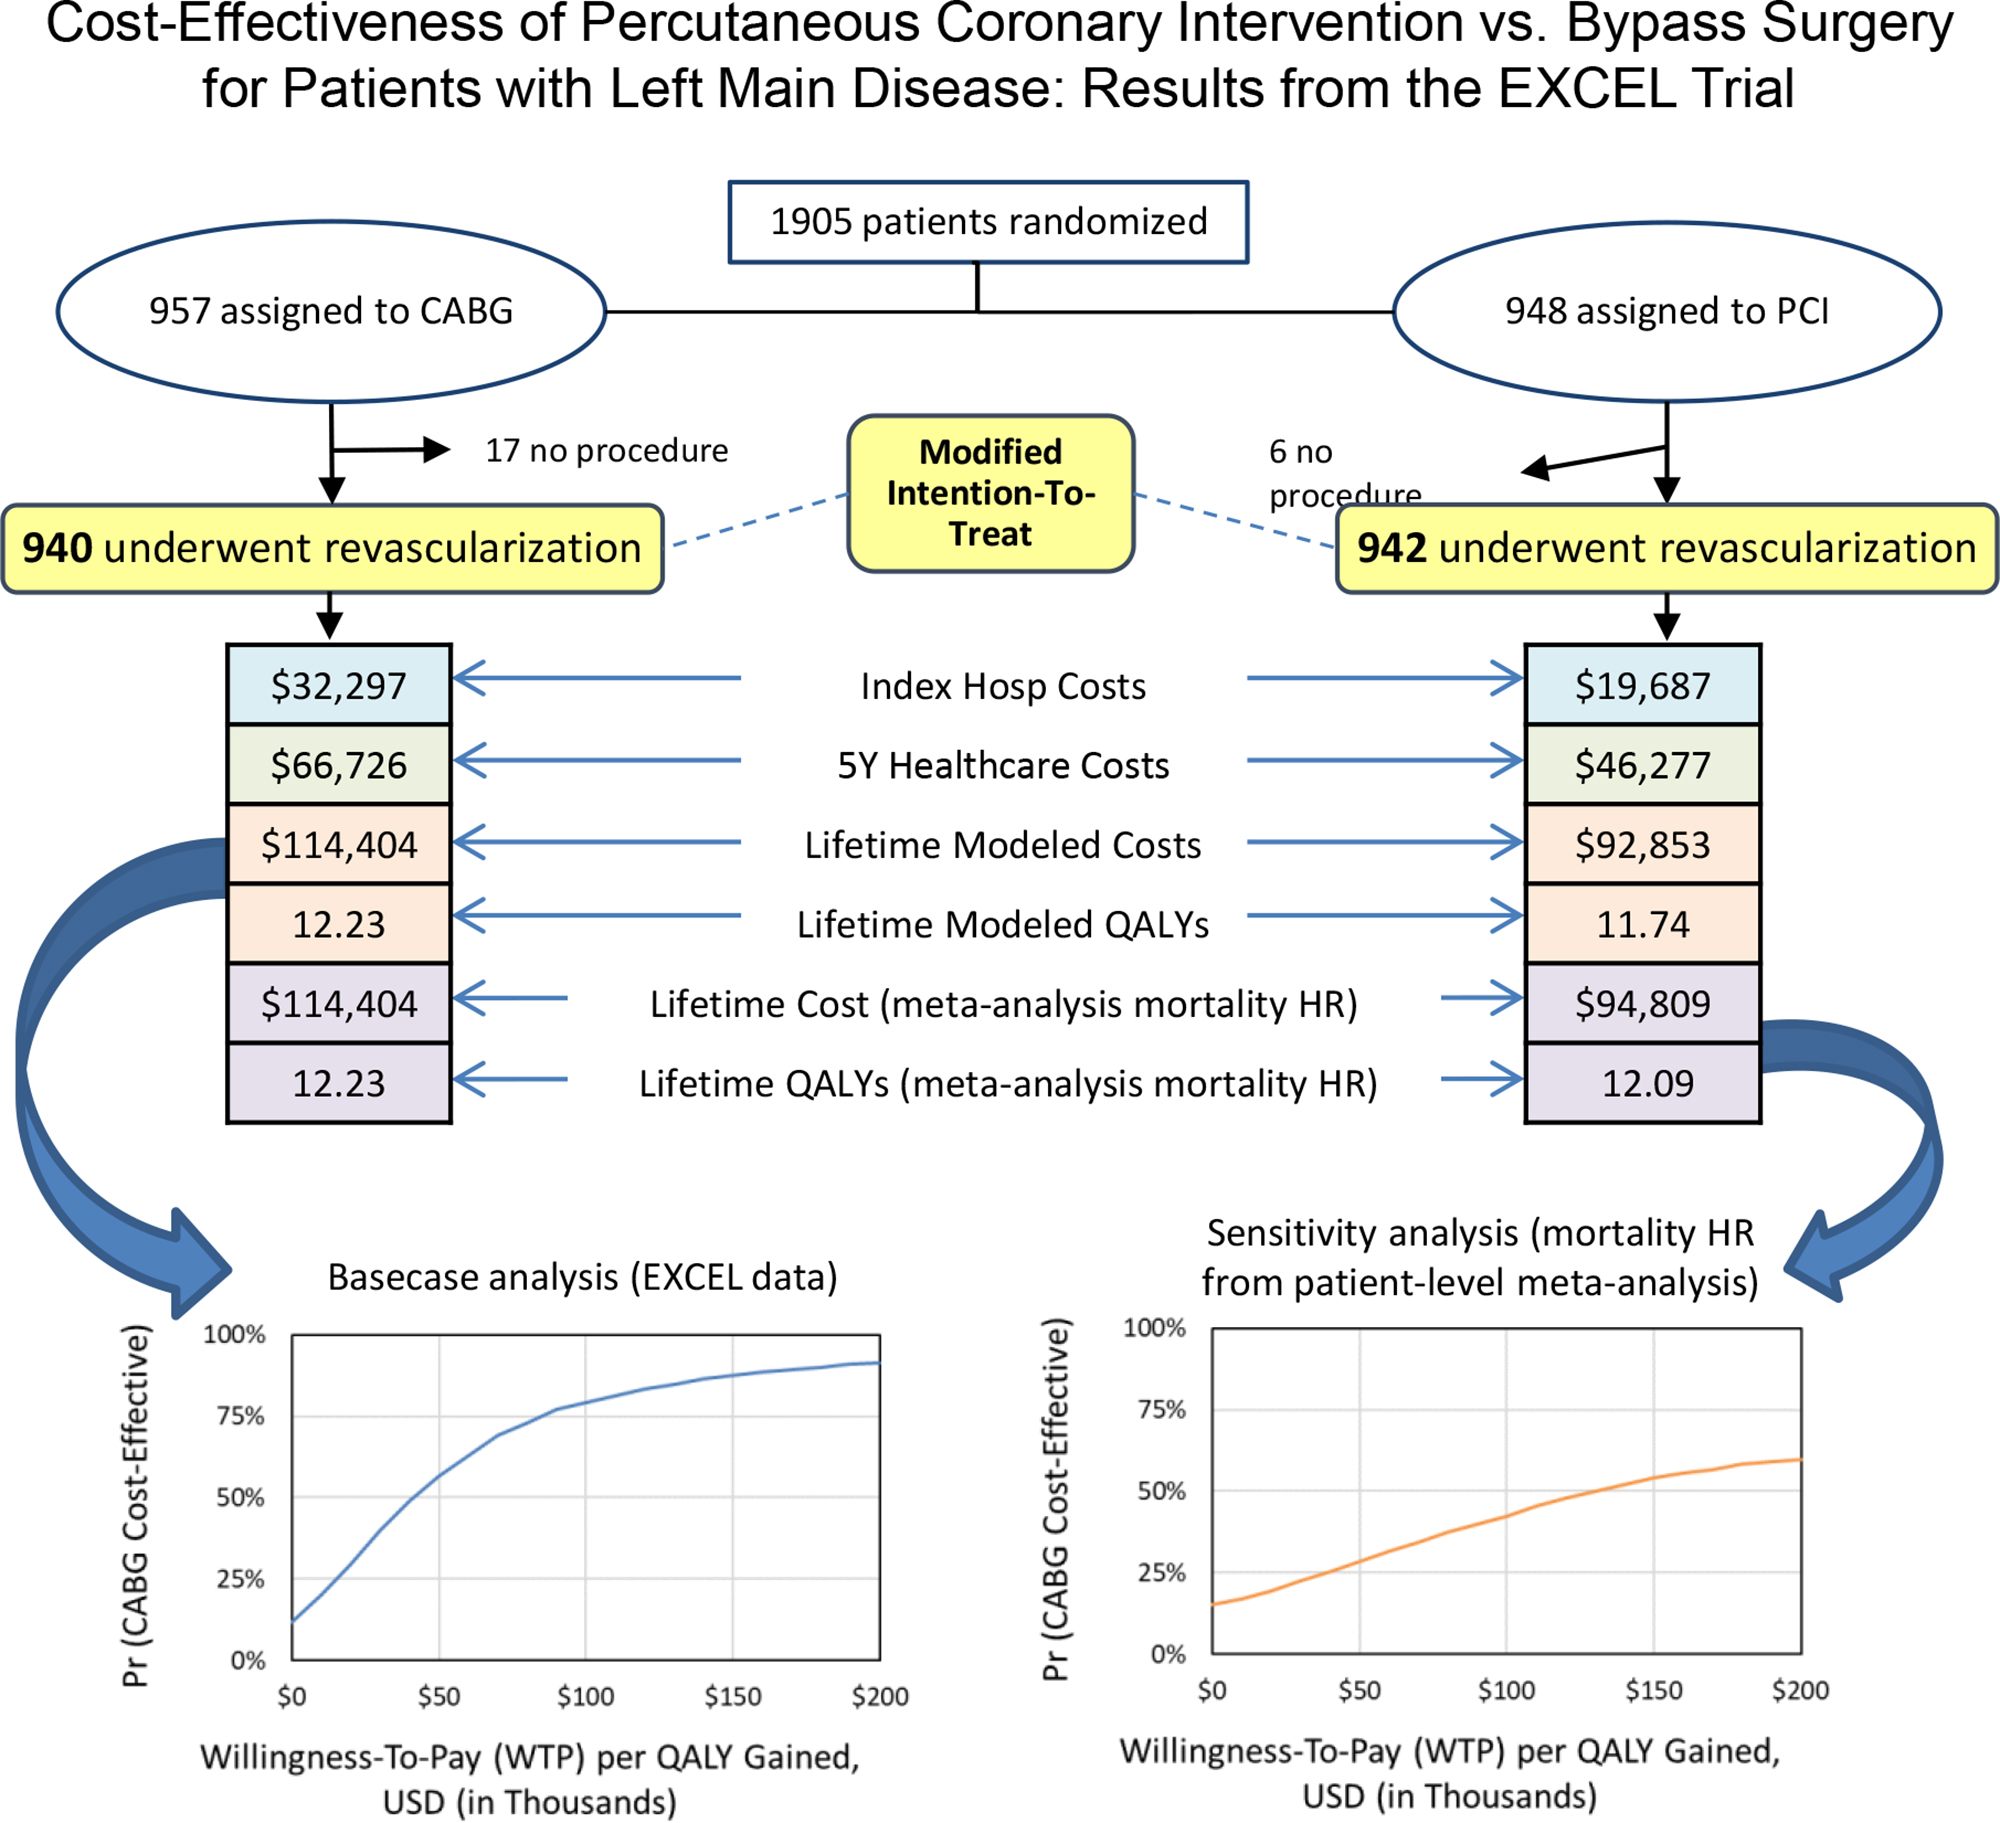 Cost-Effectiveness of Percutaneous Coronary Intervention Versus Bypass Surgery for Patients With Left Main Disease: Results From the EXCEL Trial